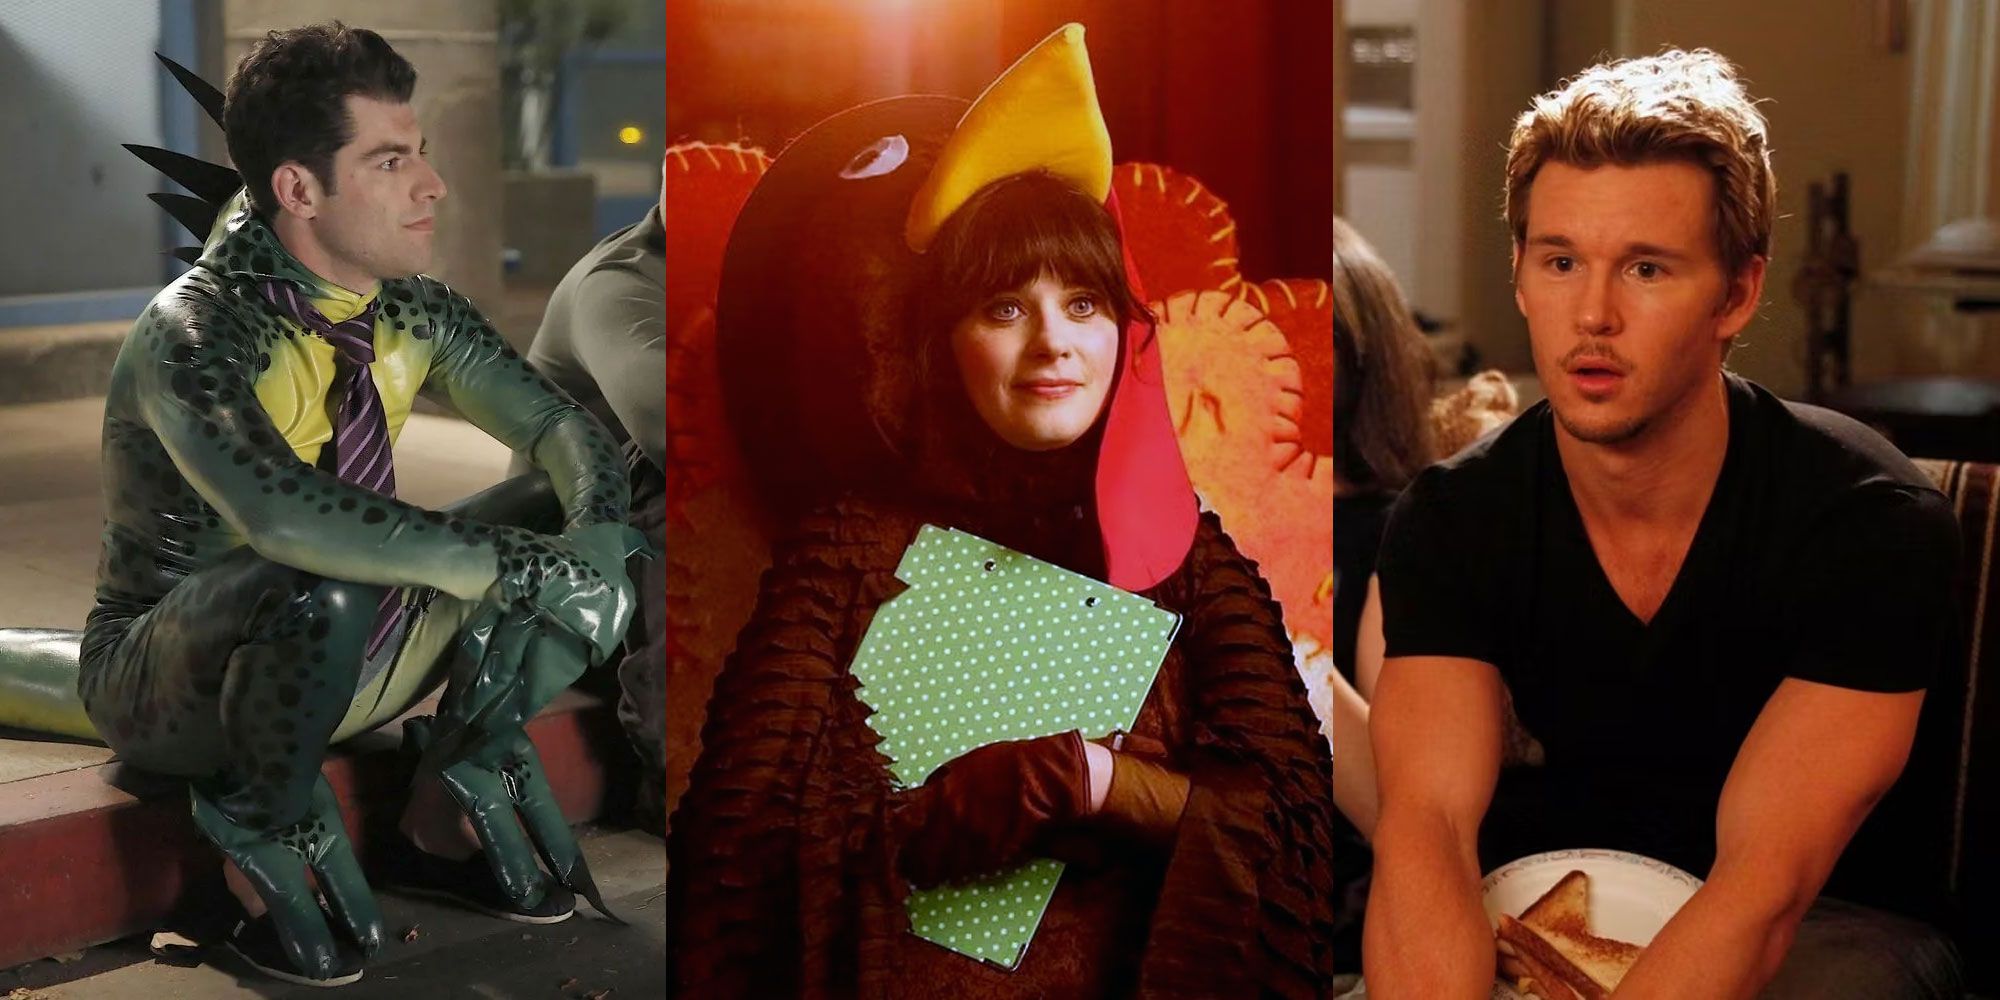 A split image features Schmidt dressed as a lizard, Jess dressed as a turkey, and a love interest from Season 1 of New Girl